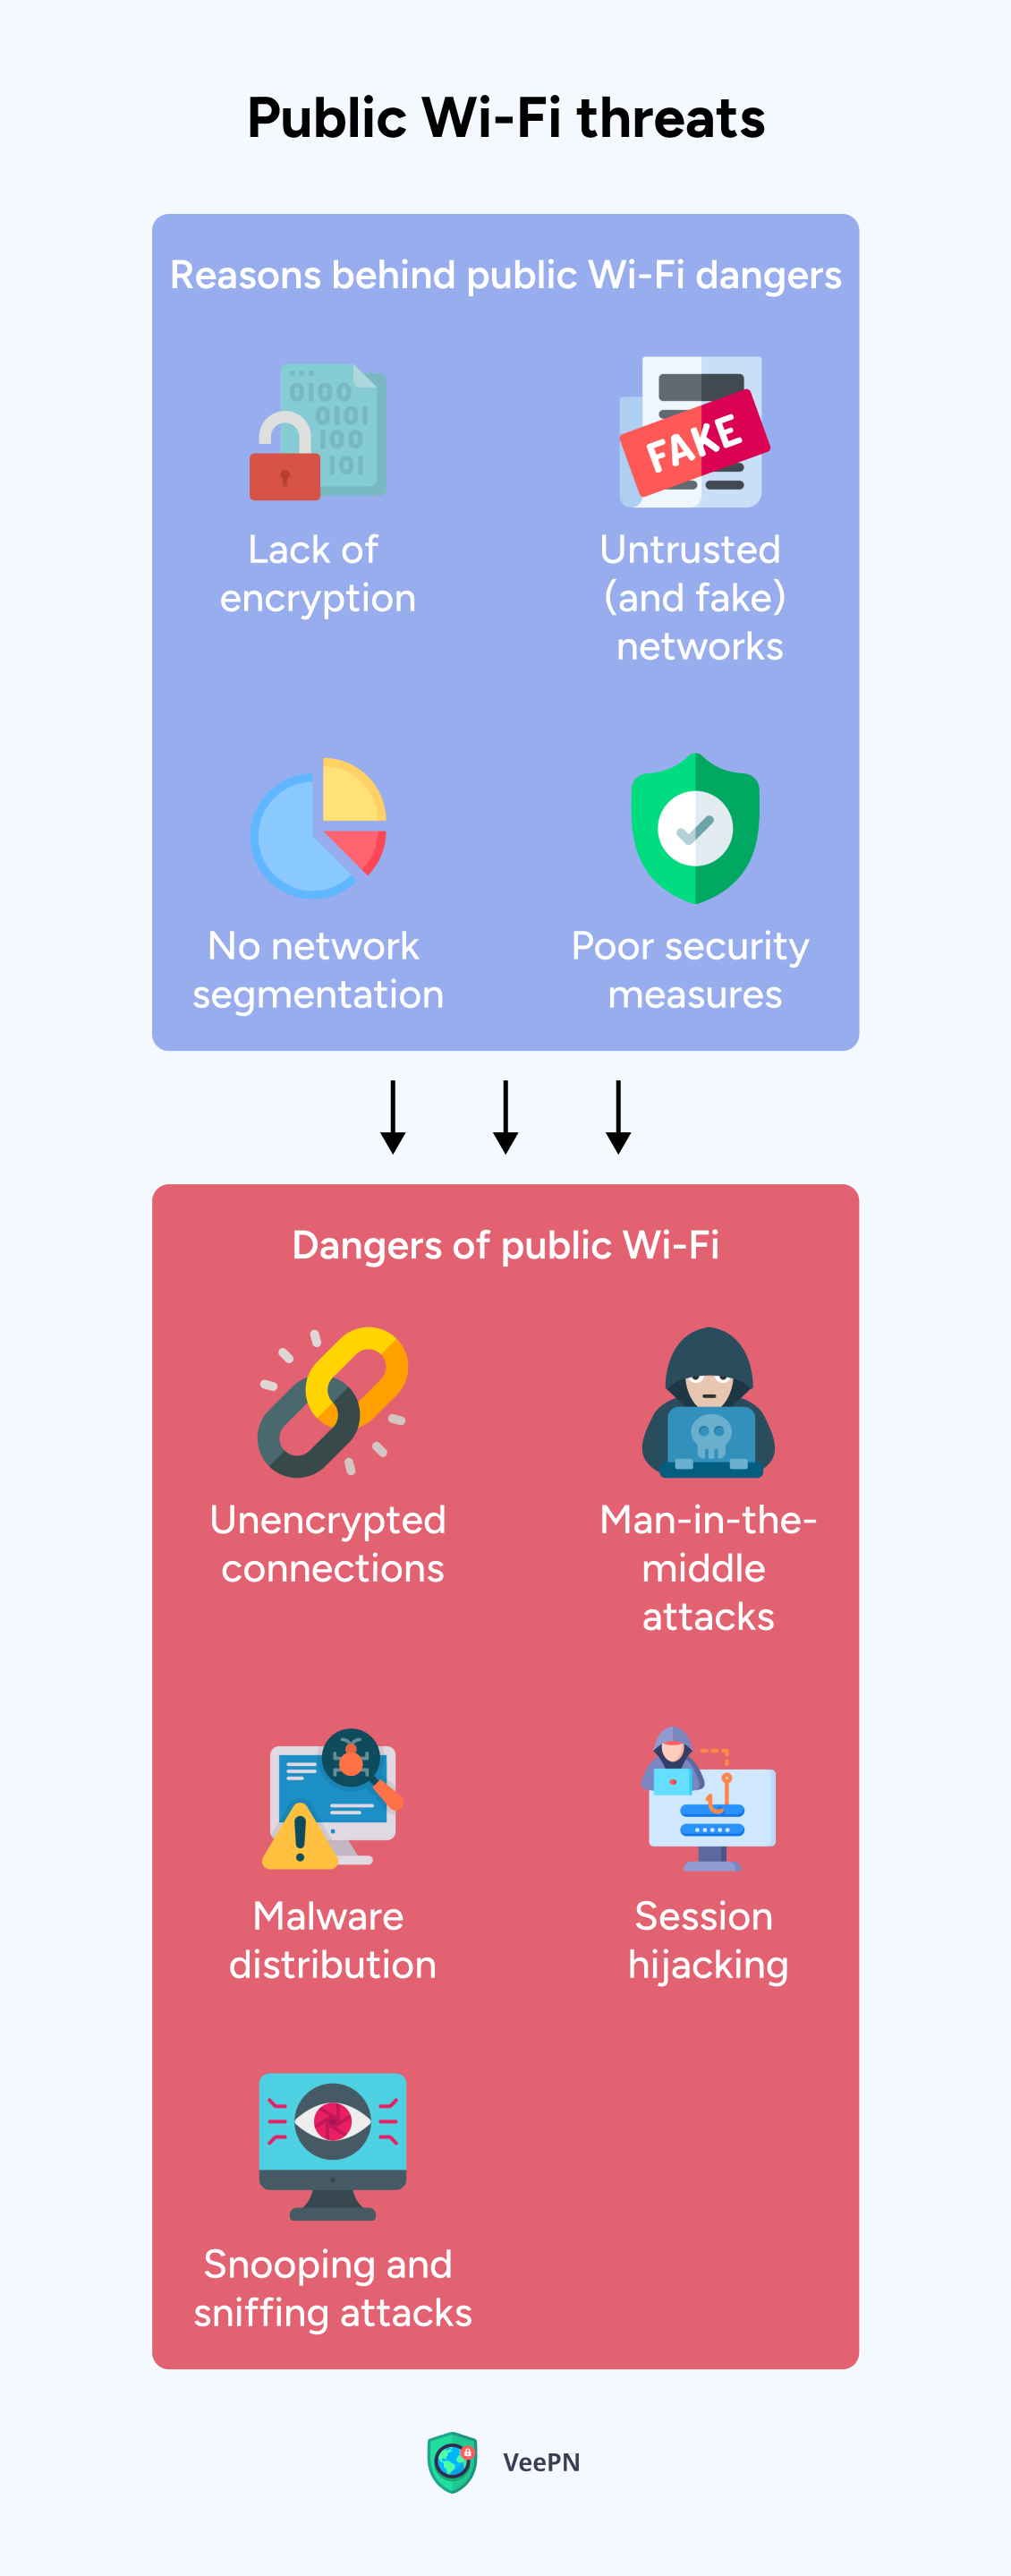 What are the dangers of public Wi-Fi?